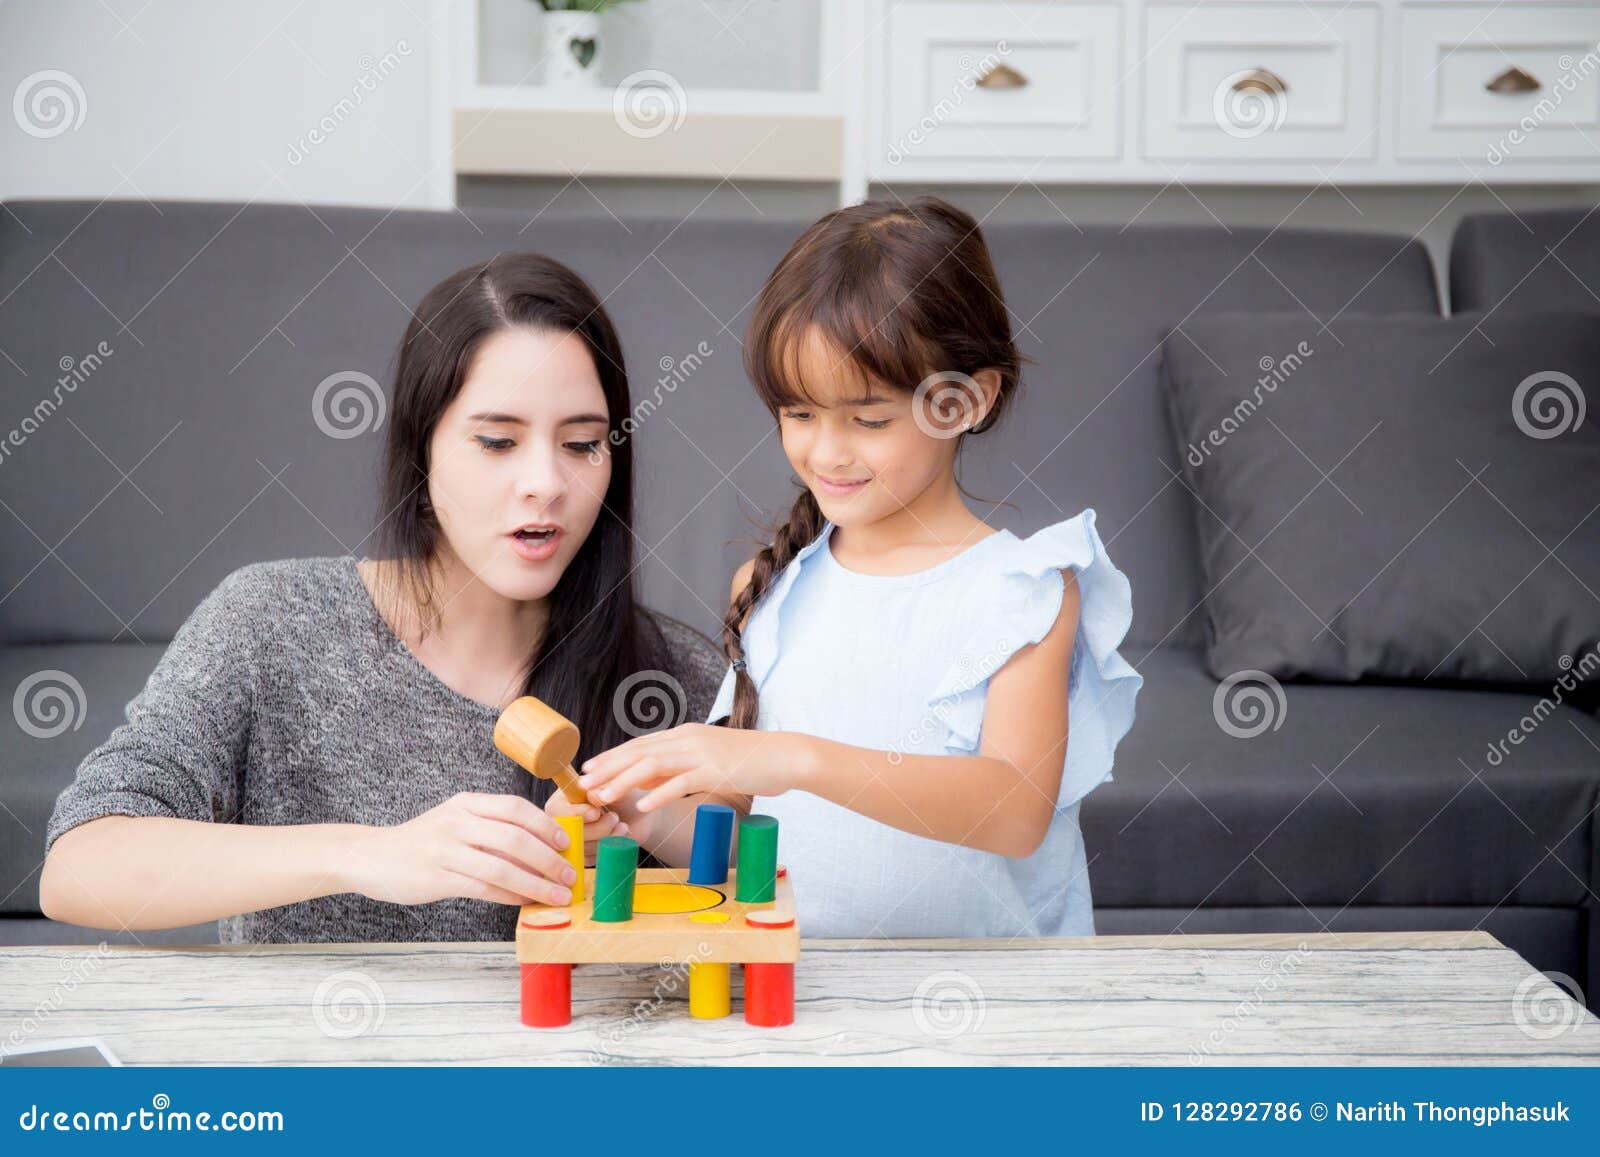 Moms teaching daughter. Children playing together on the Table. Ребенок и мама азиаты она его учит. The Family is playing with Toys on the Floor.